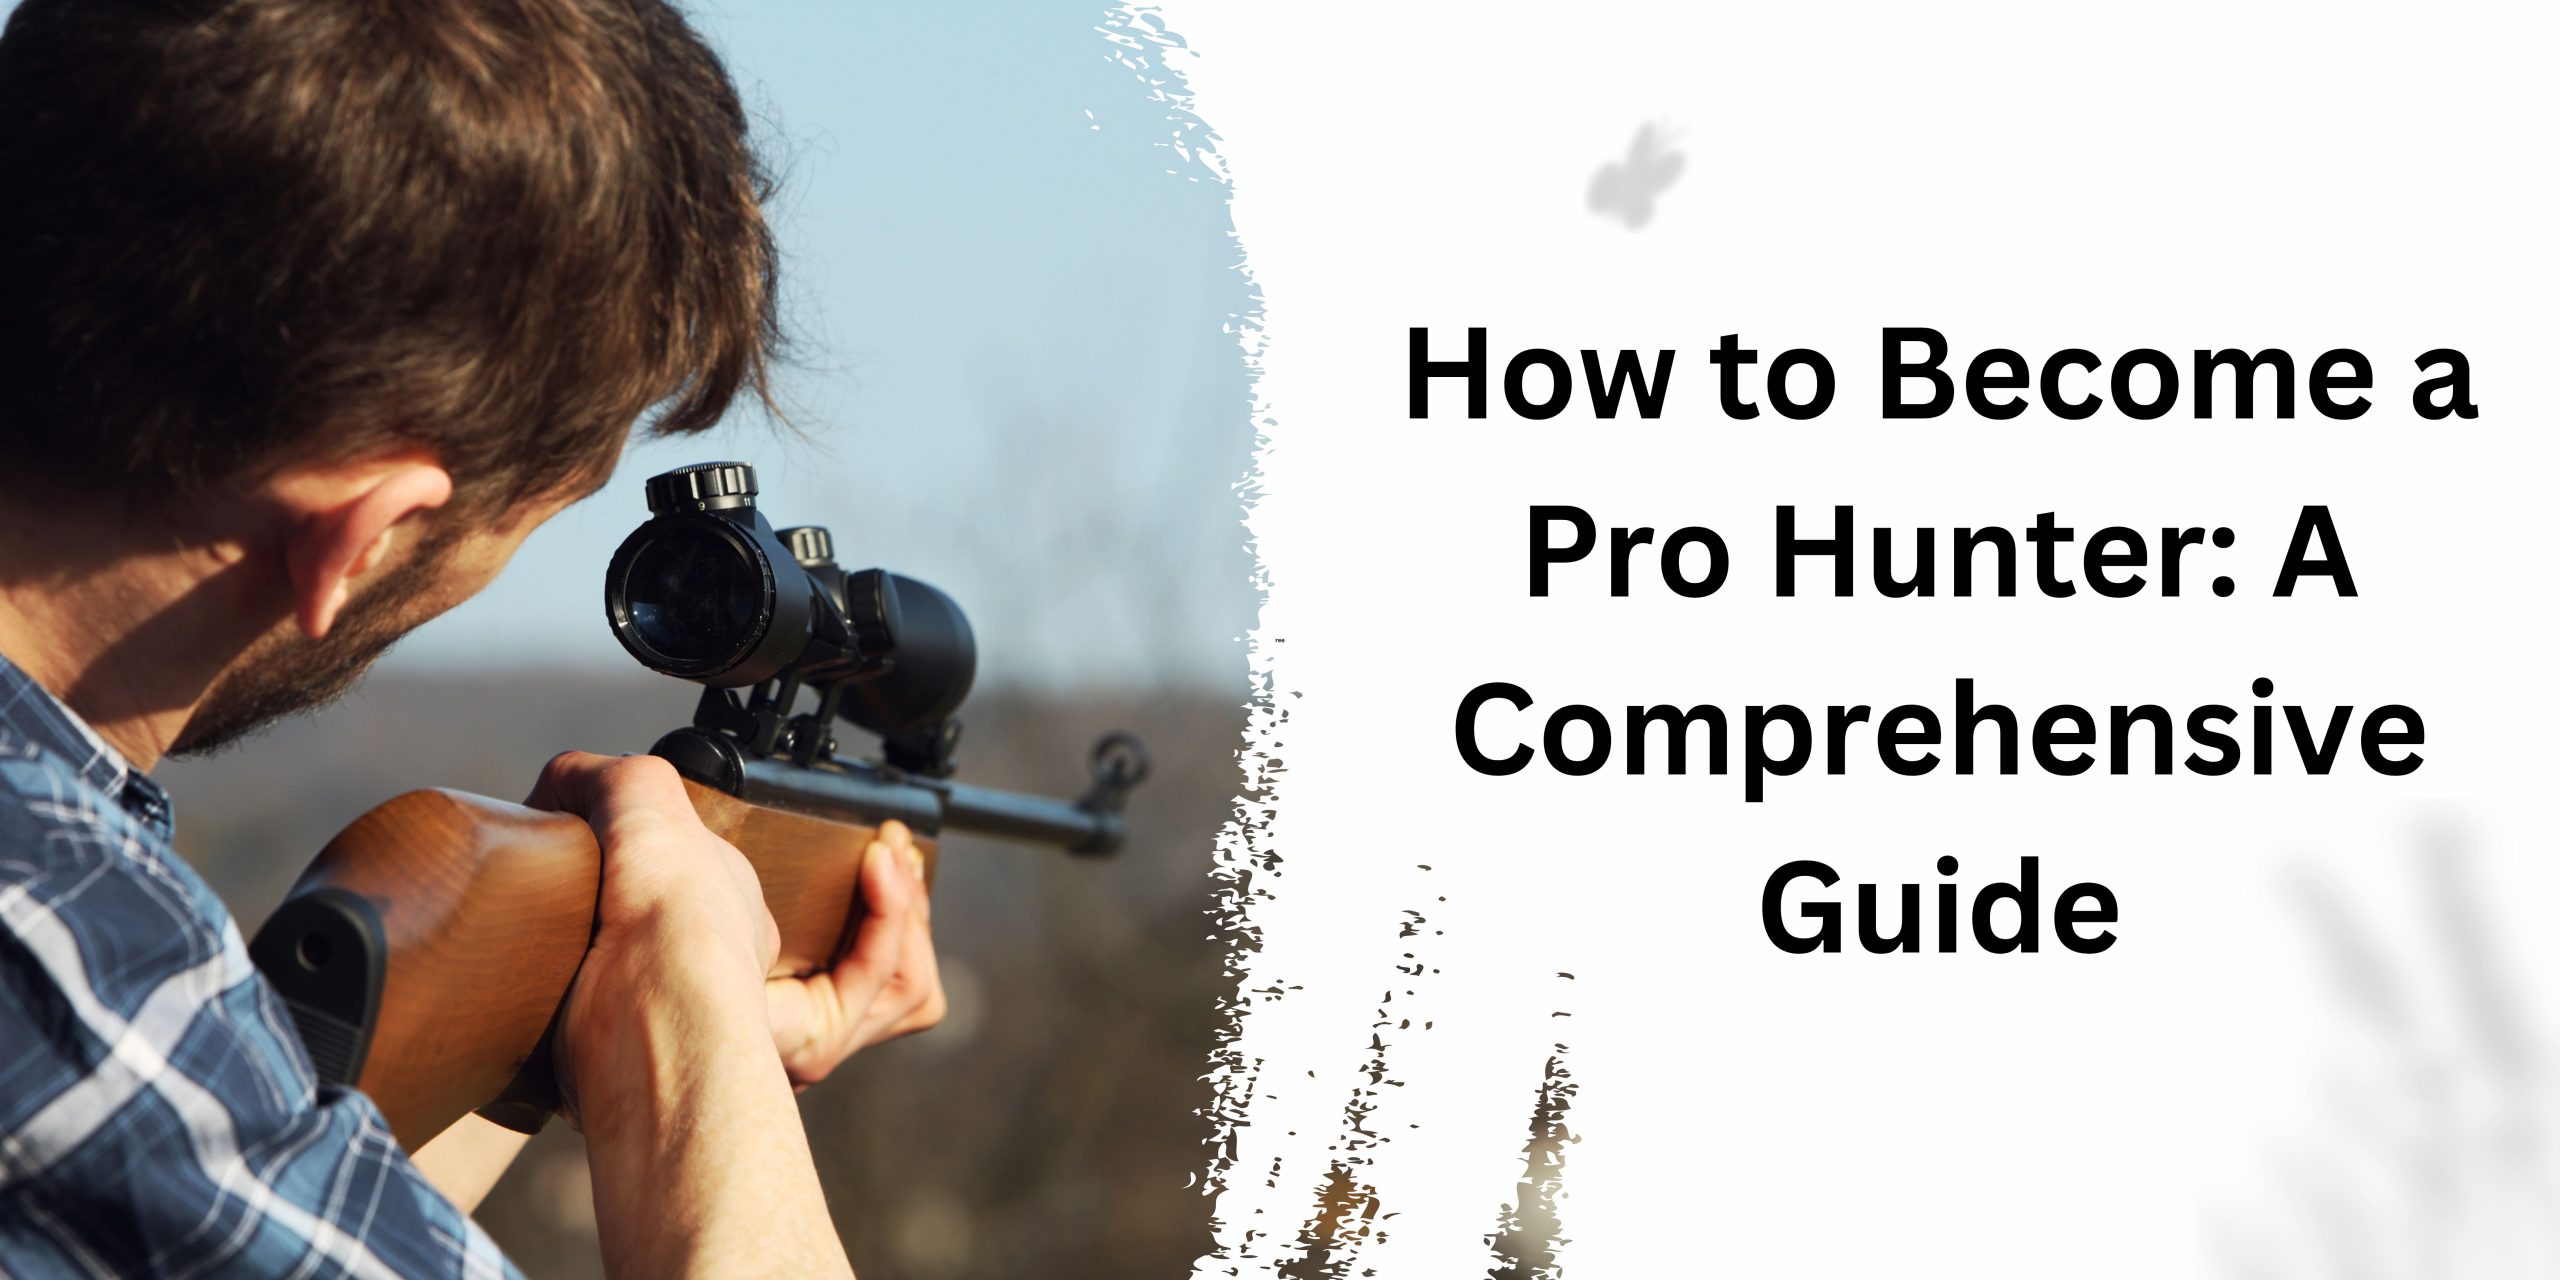 How to Become a Pro Hunter